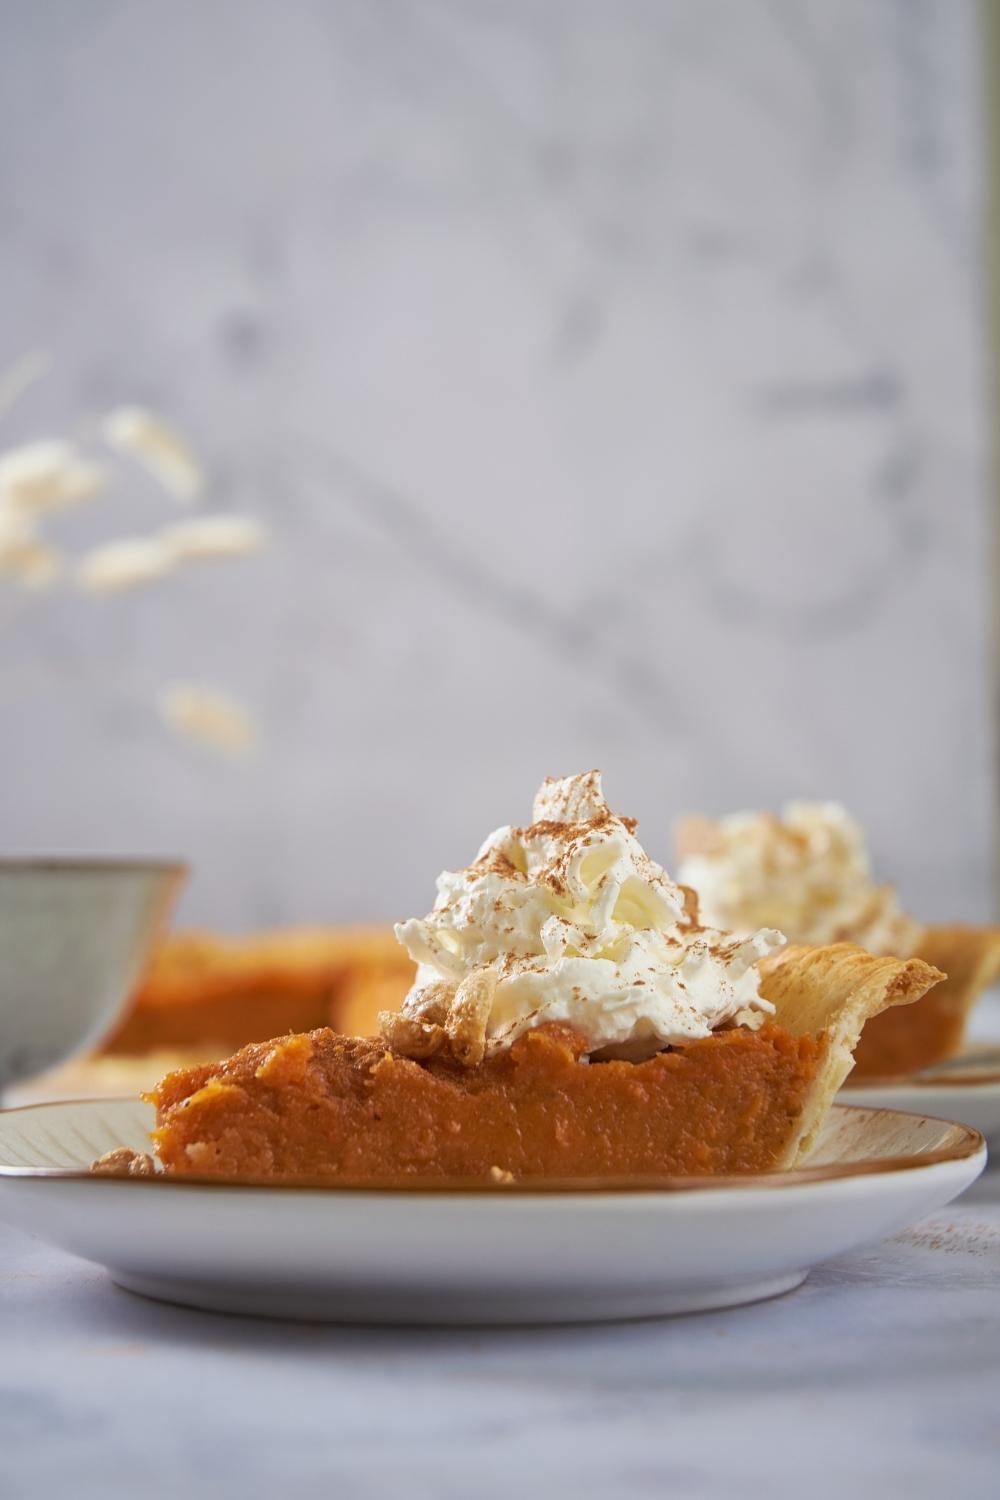 Patti Labelle's sweet potato pie on a white plate topped with whipped cream.